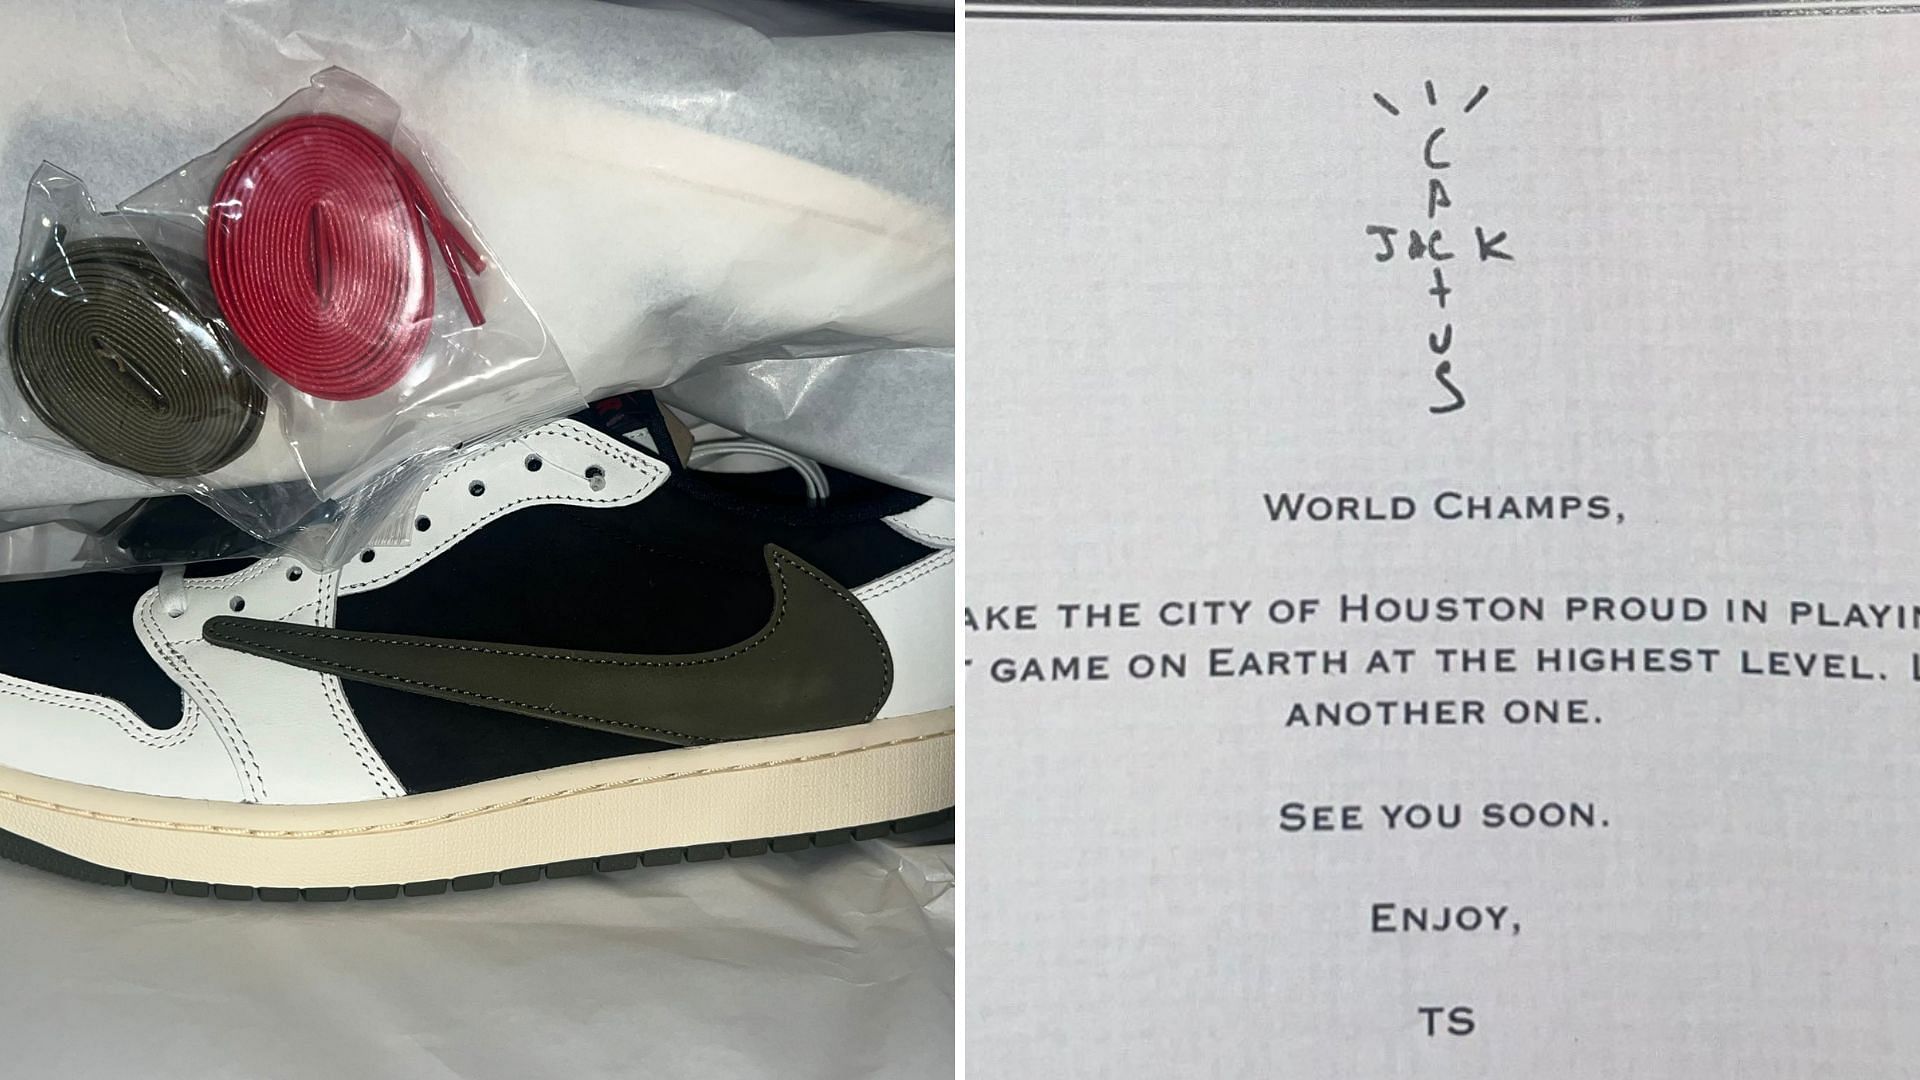 In Photos: Rapper Travis Scott gifts Houston Astros players shoes